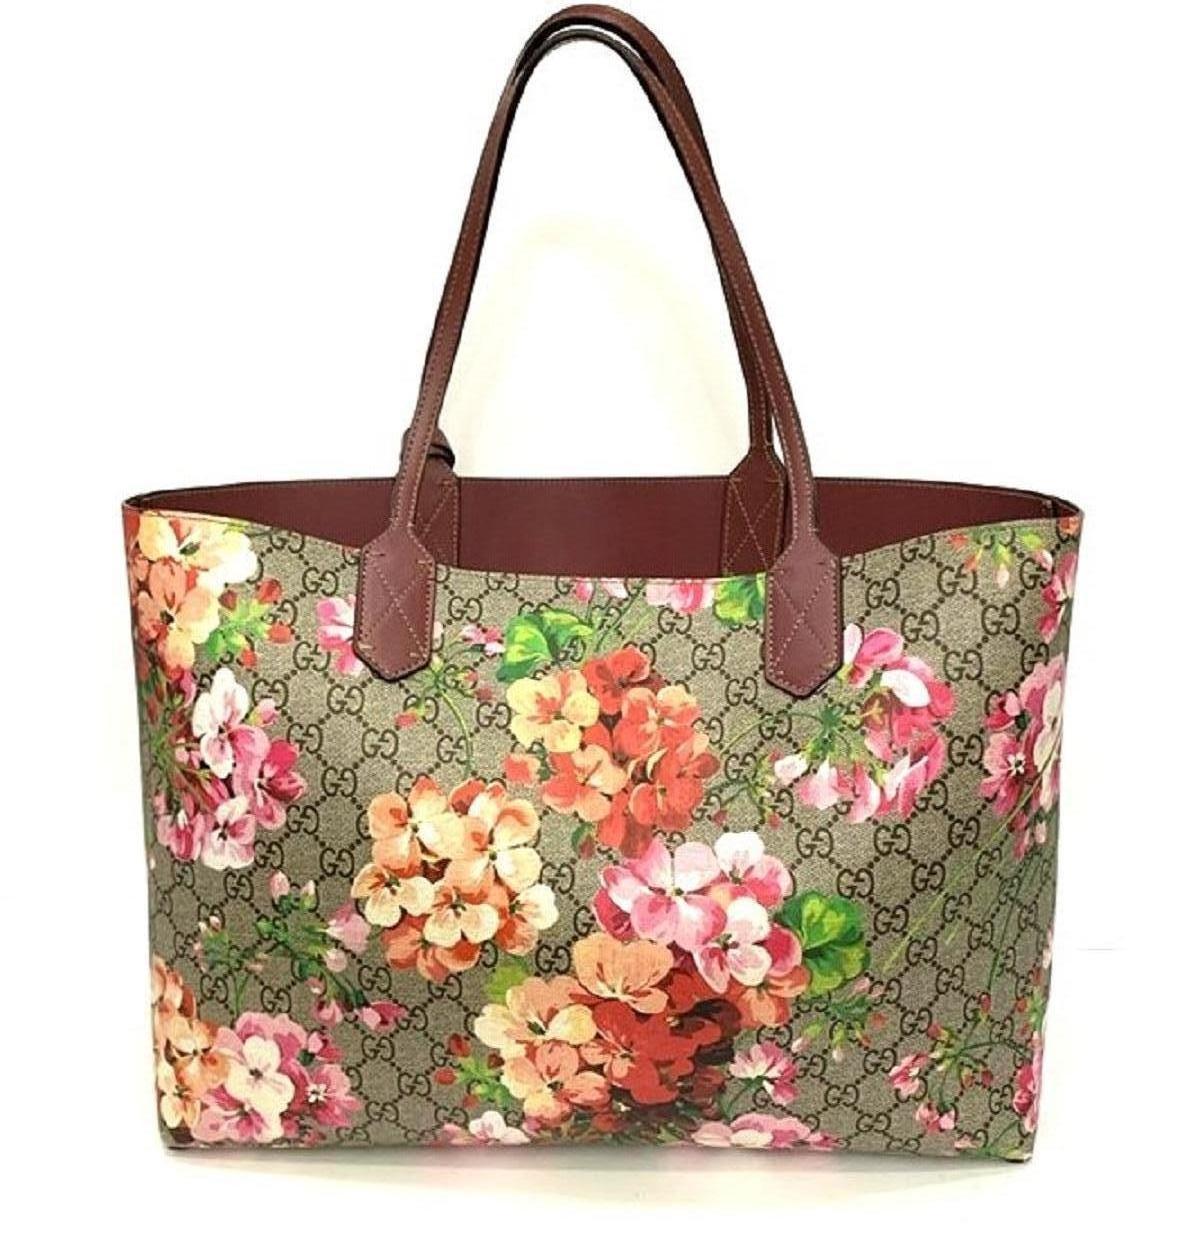 Gucci blooms line backpack made of GG supreme canvas with antique pink leather details. Completely decorated with pink flowers. Front closure with hook. Internally it is lined in antique pink fabric. Front pocket pocket with zip closure. Very roomy.